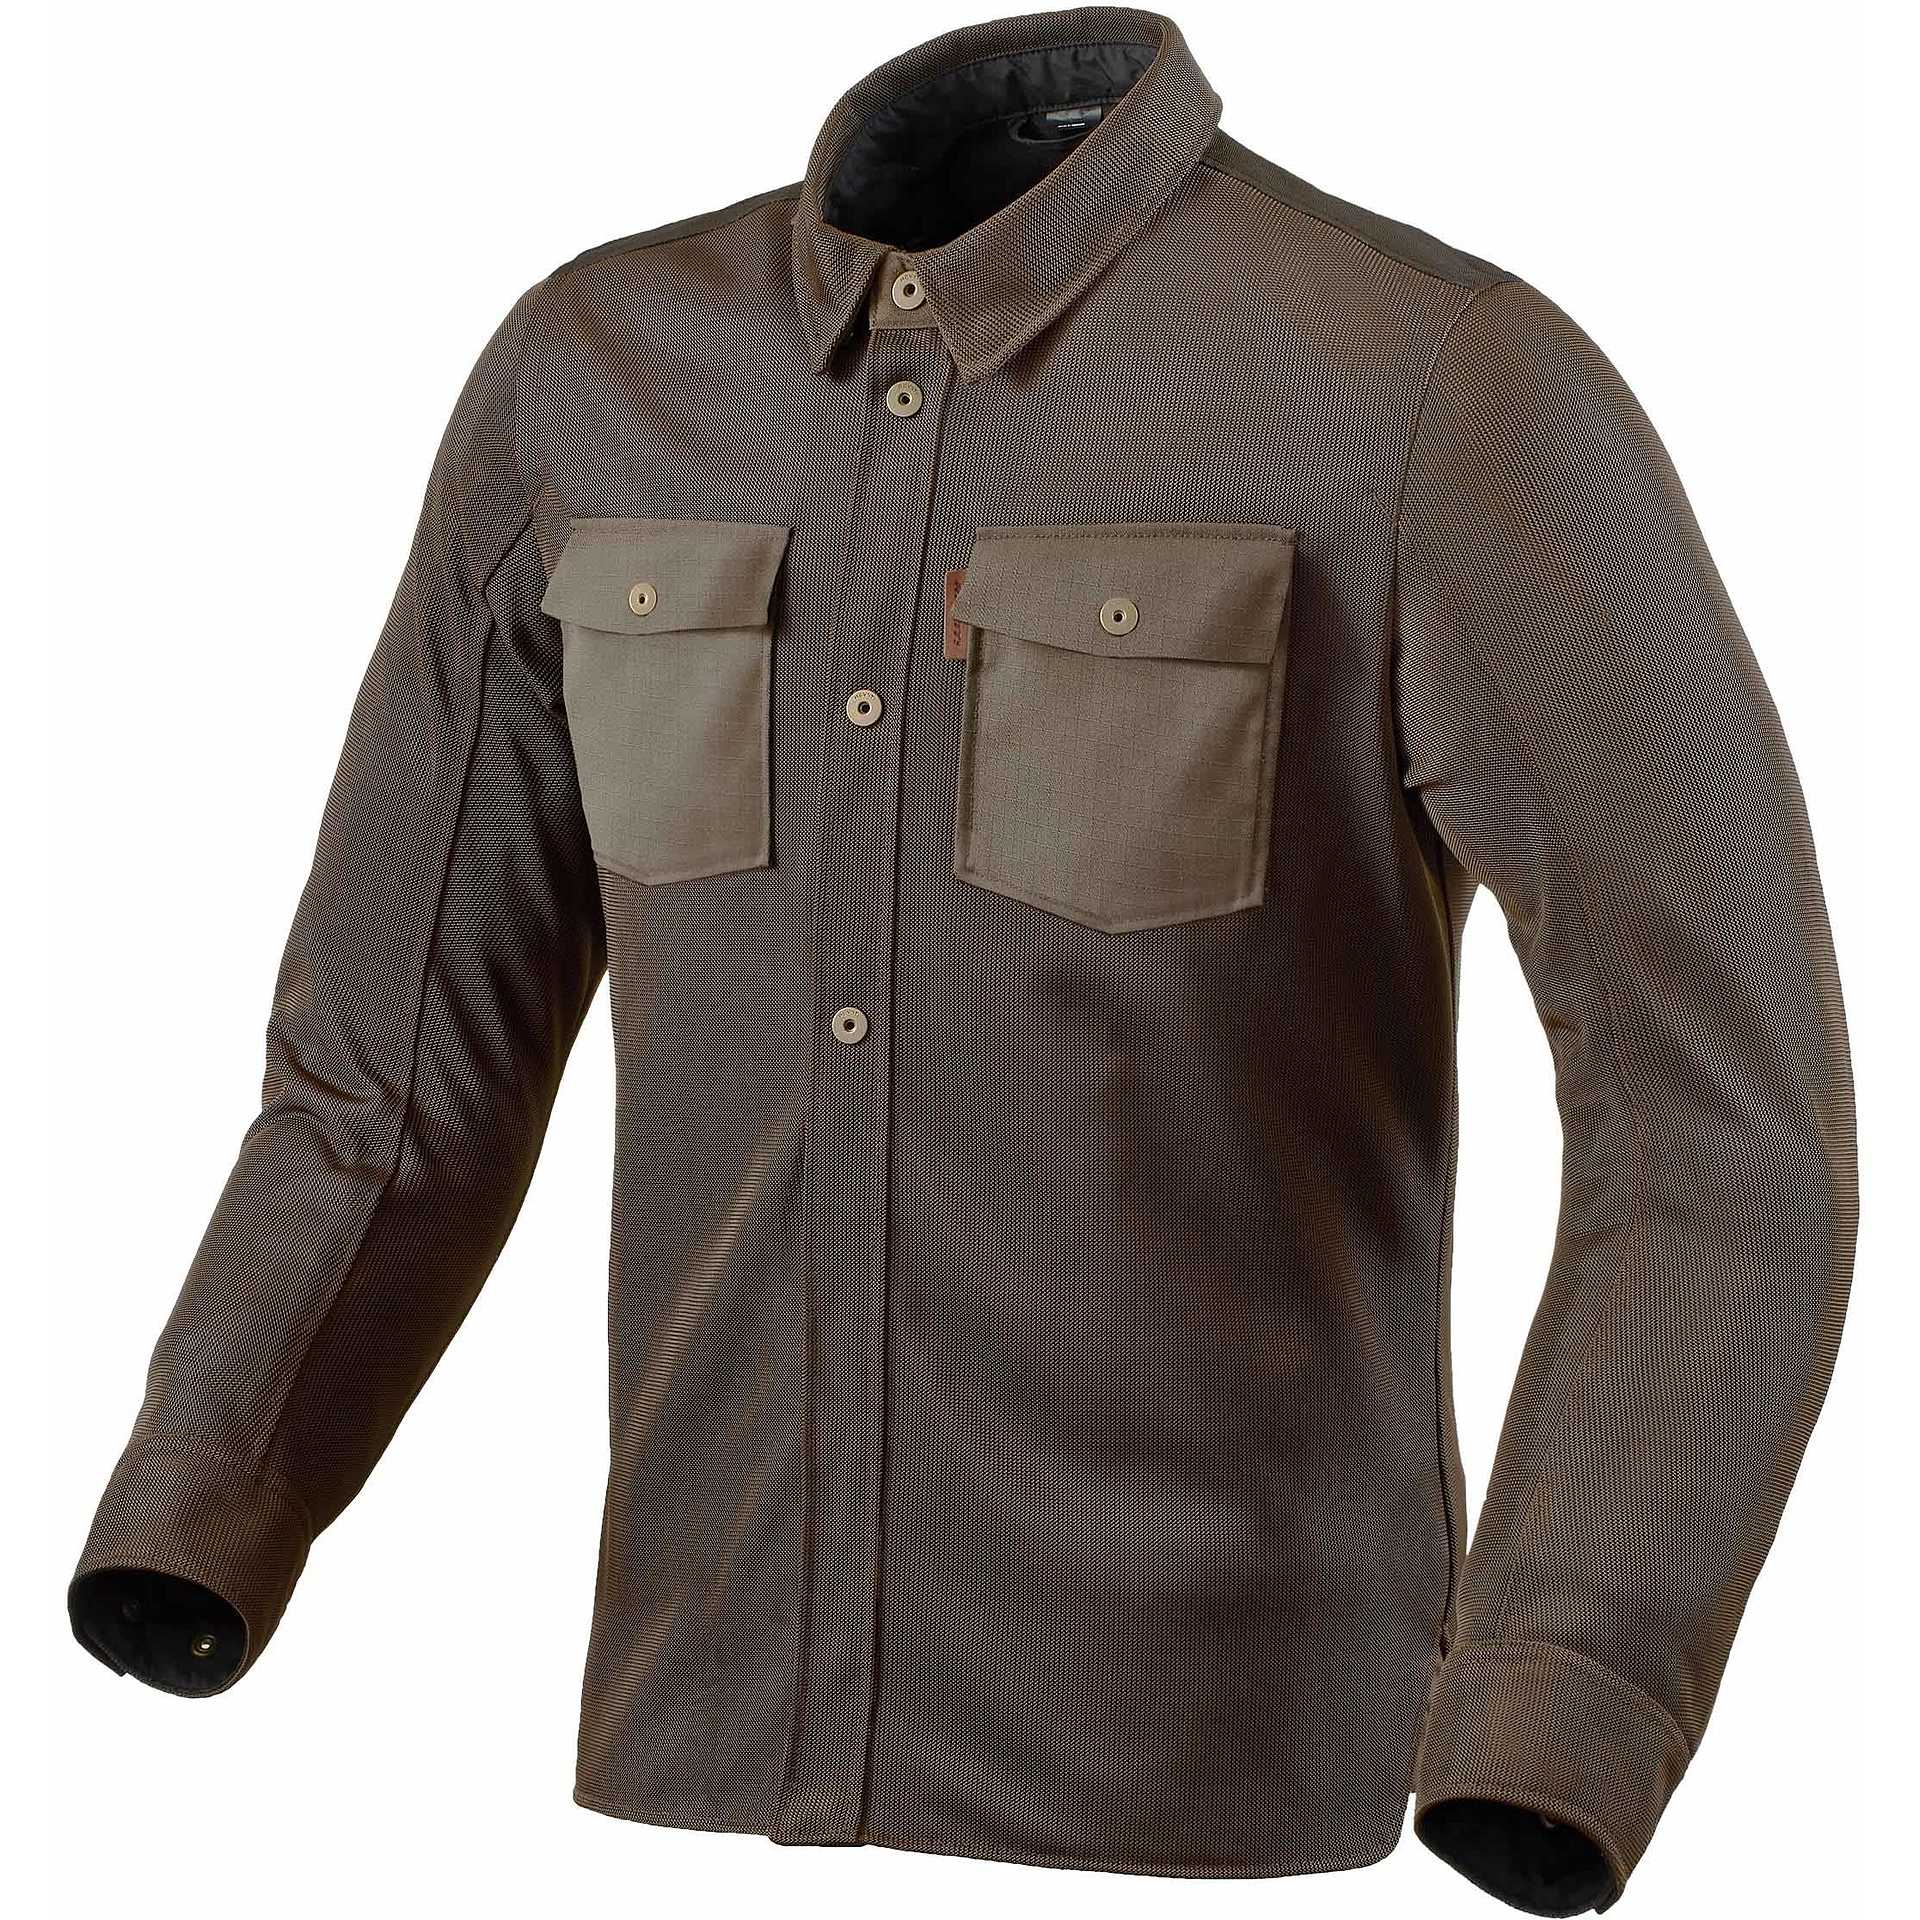 Image of REV'IT! Overshirt Tracer Air 2 Jacket Brown Talla M